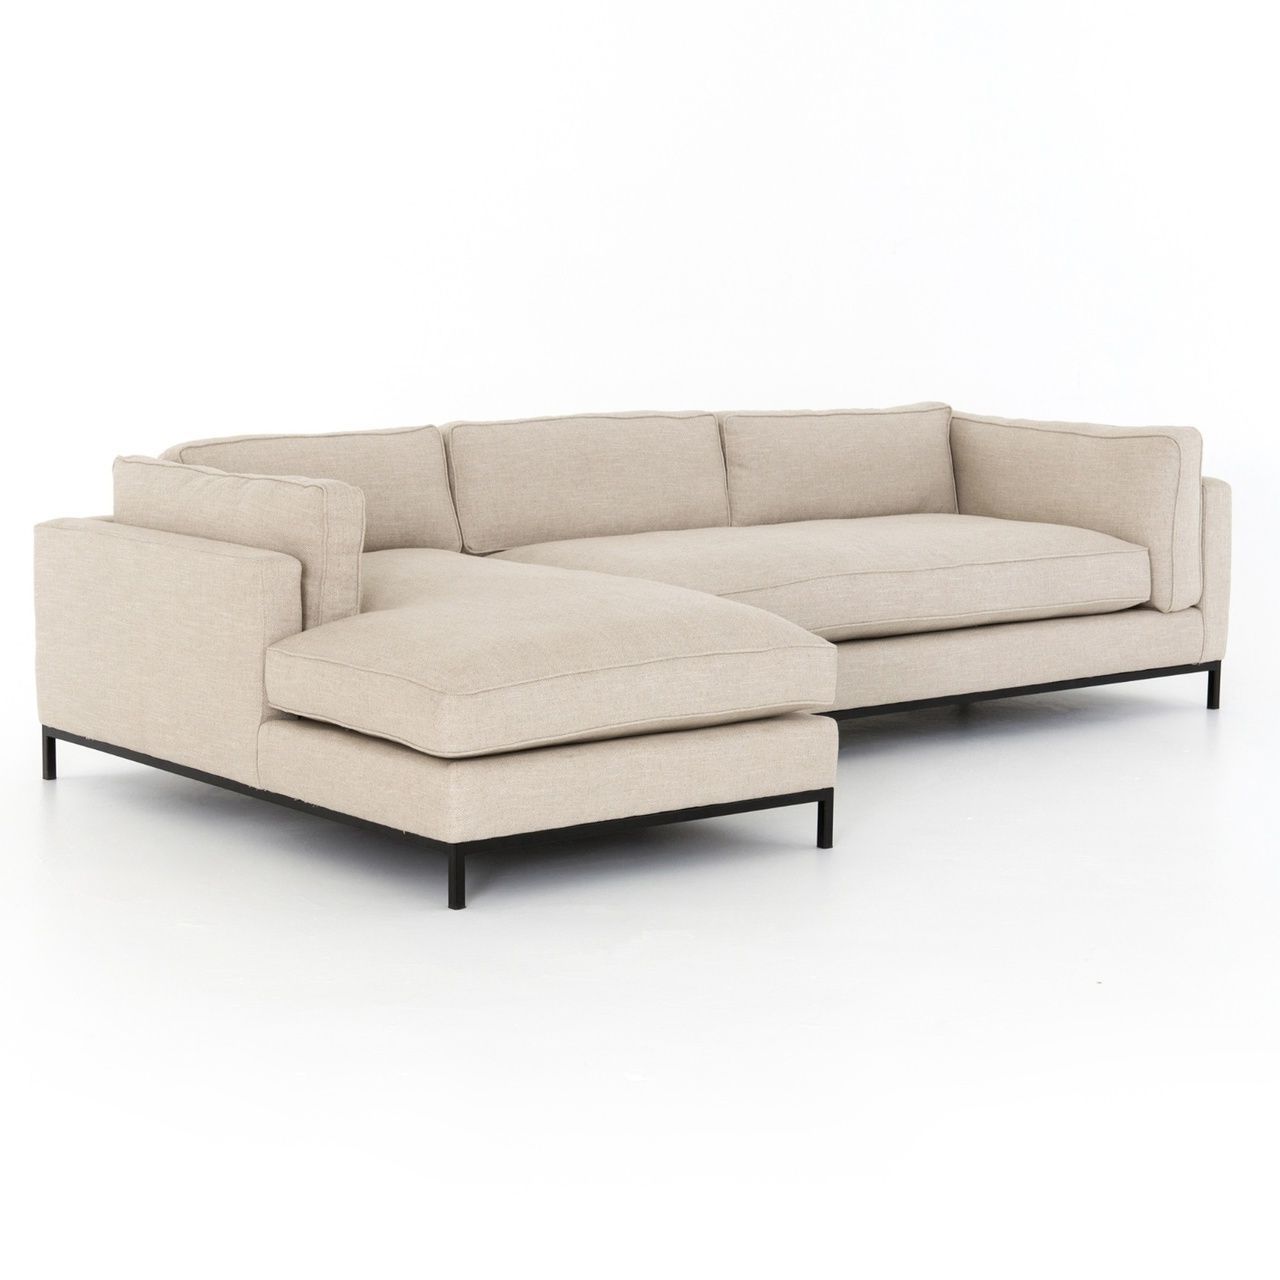 Most Up To Date 2pc Burland Contemporary Sectional Sofas Charcoal Pertaining To Grammercy Modern Sand Fabric 2 Piece Sectional Sofa (View 17 of 25)